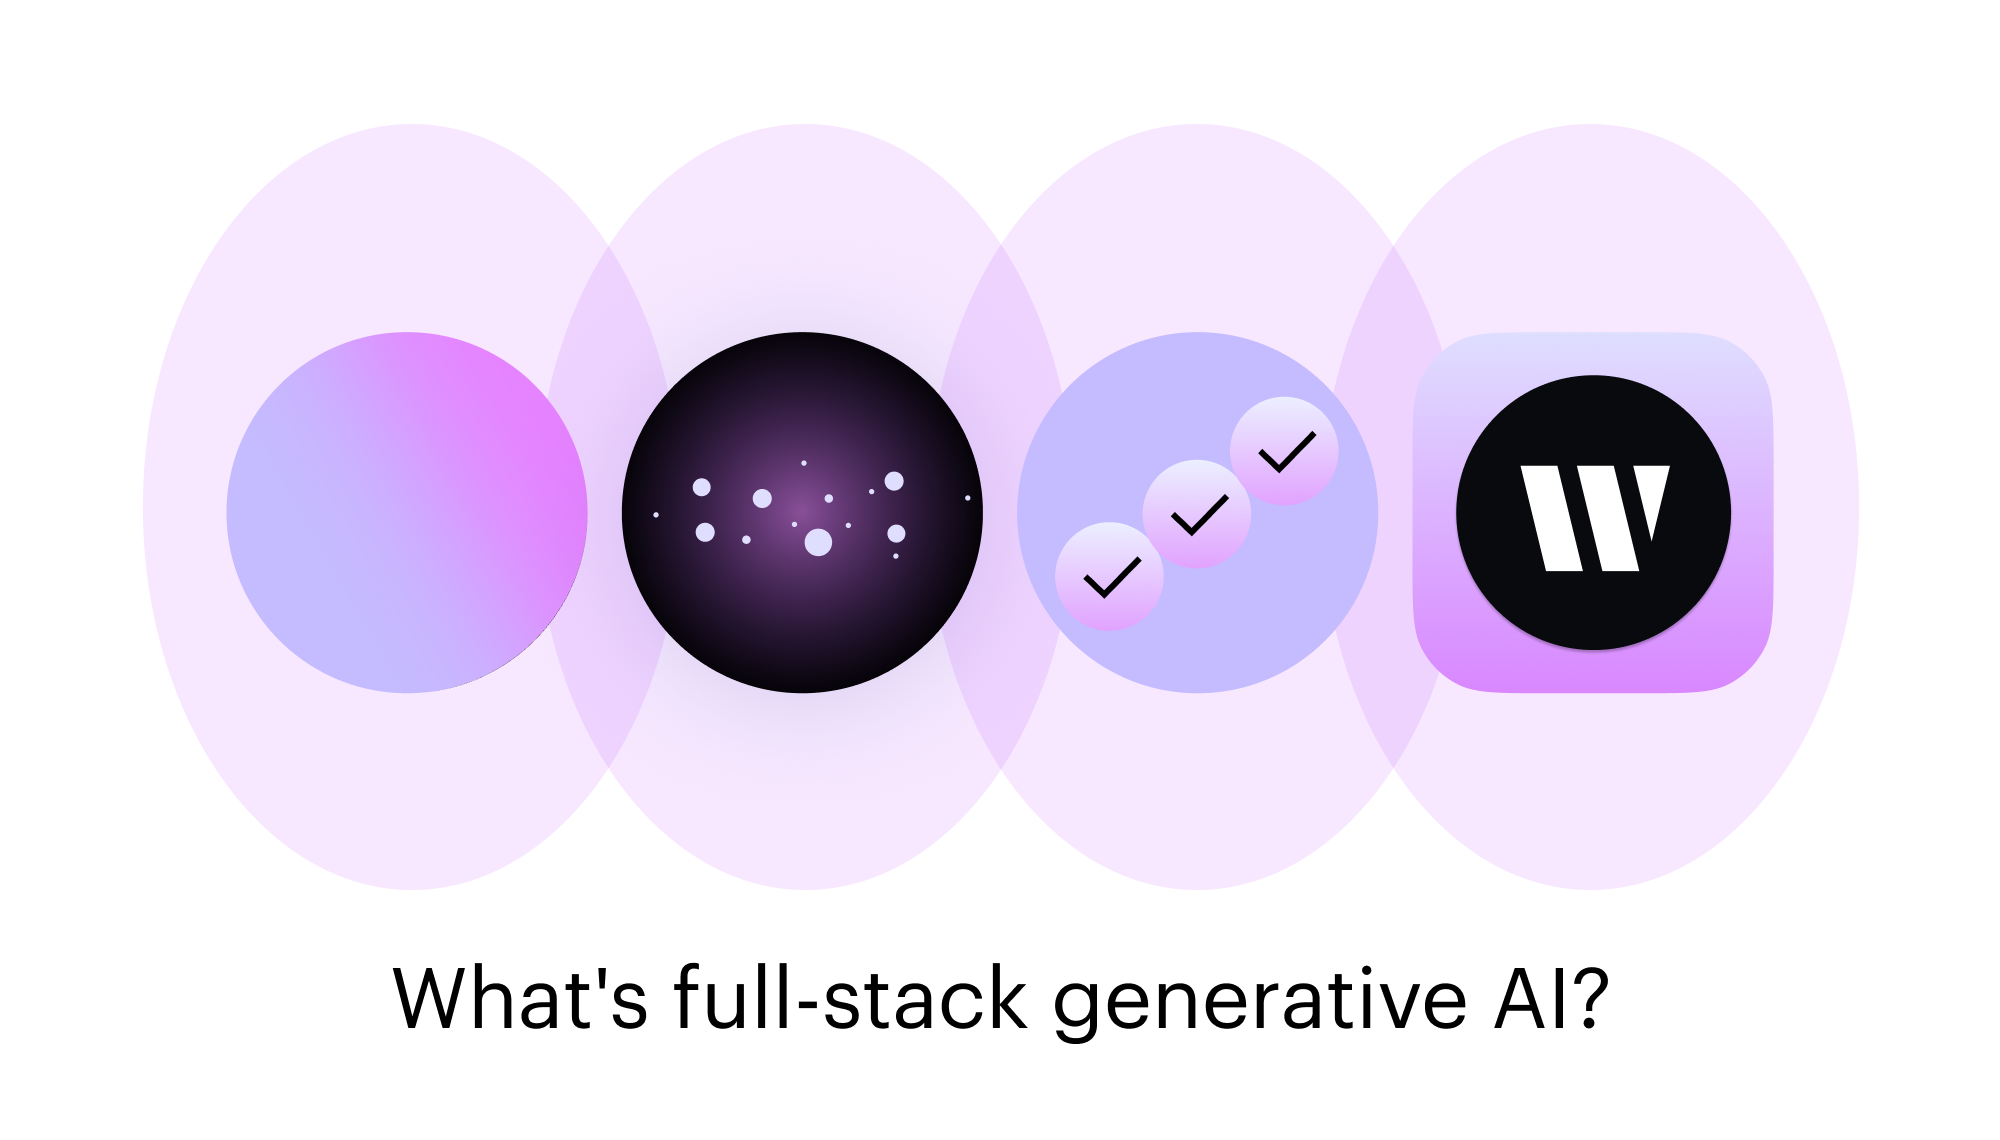 What's full-stack generative AI?